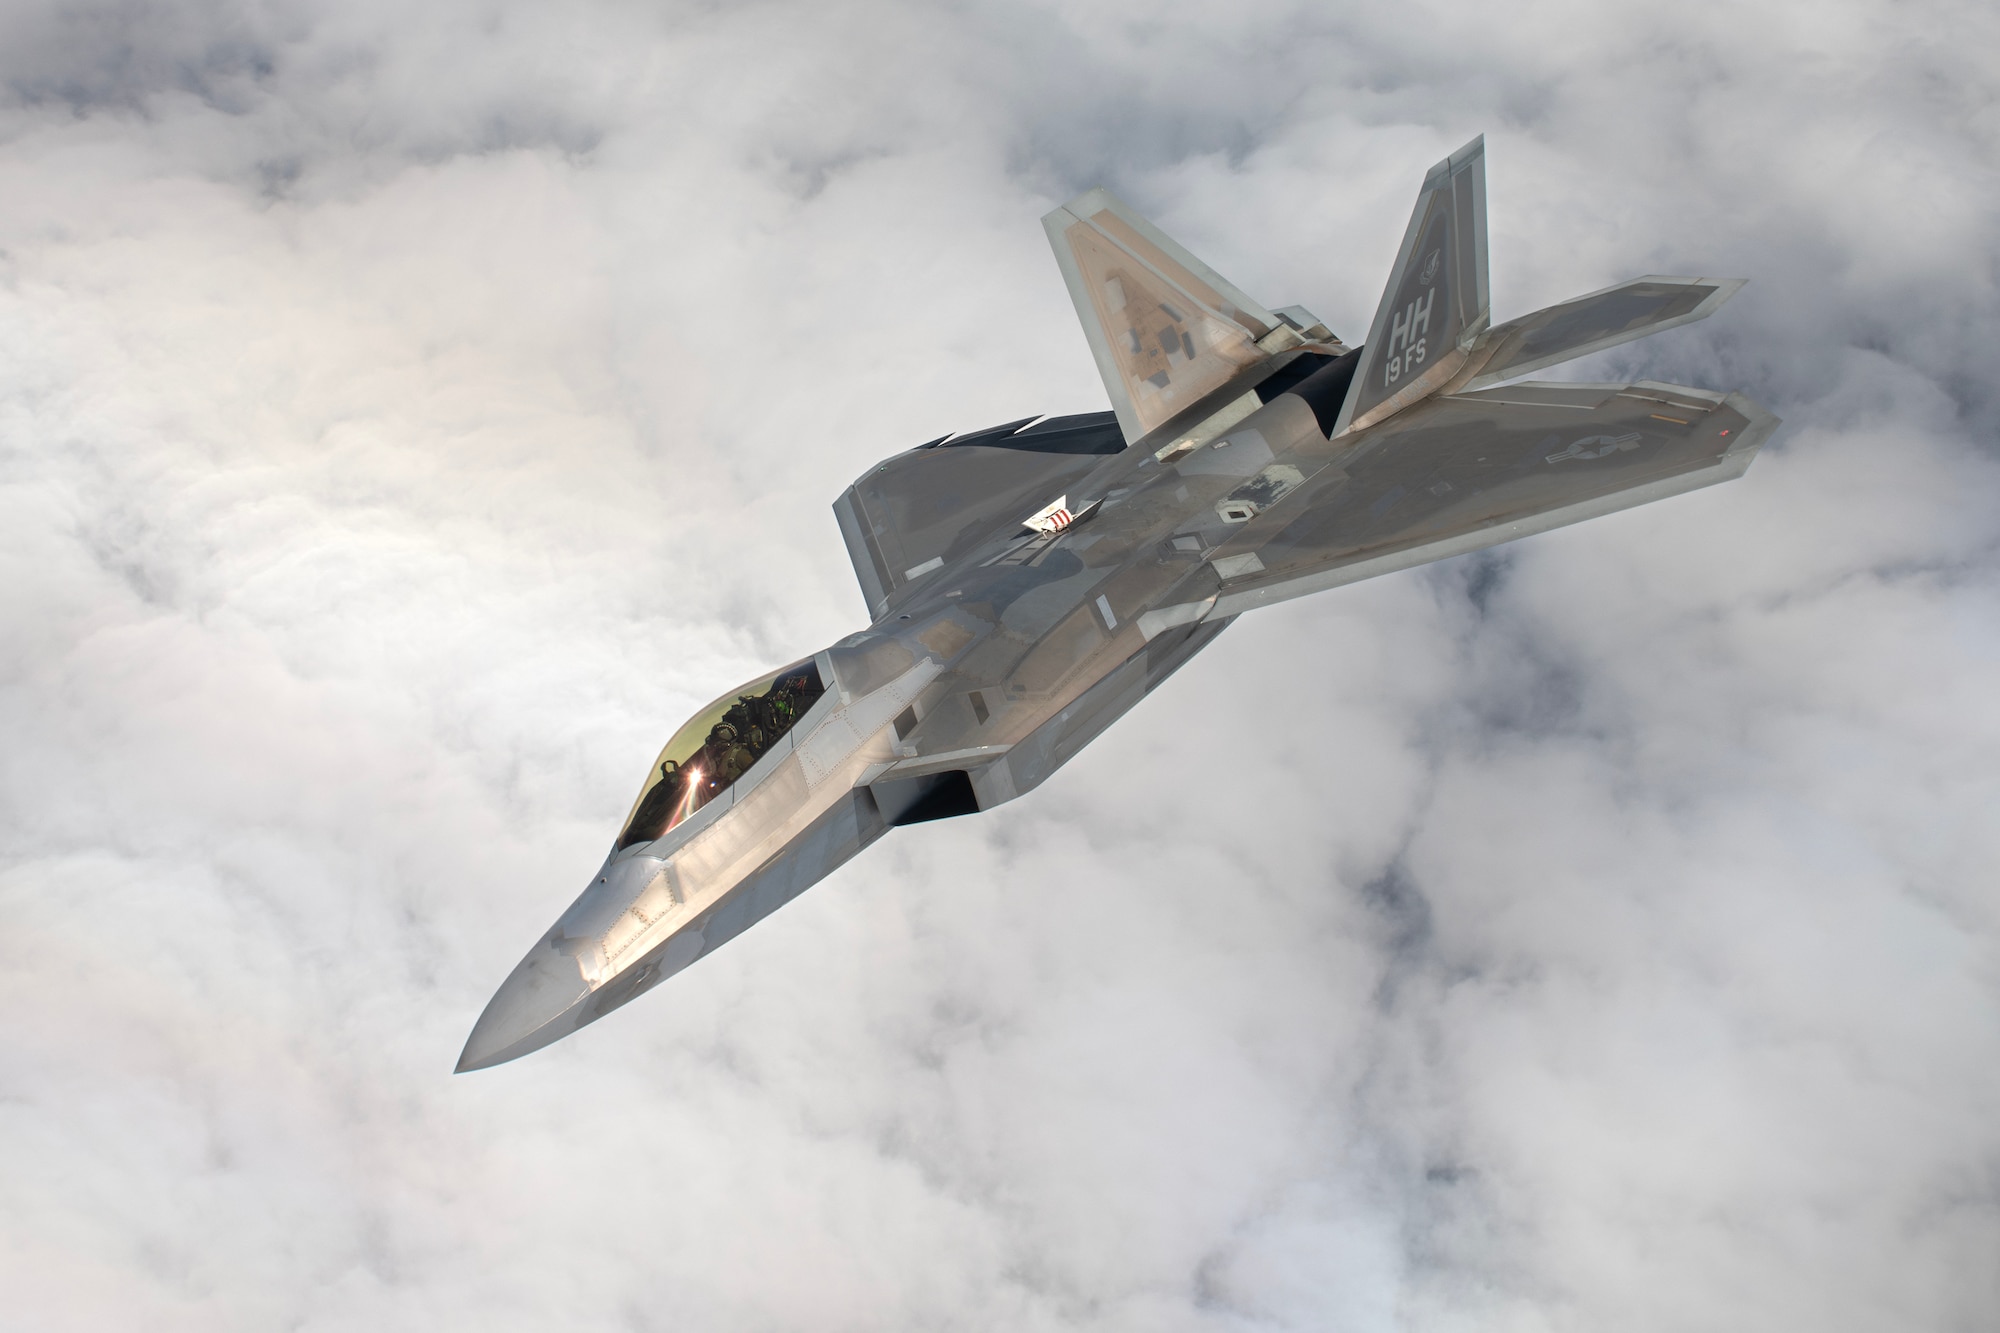 An F-22A Raptor assigned to the 19th Fighter Squadron, Joint Base Pearl Harbor–Hickam, Hawaii, departs after receiving aerial refueling during a large force exercise over the Pacific Ocean, April 10, 2024. The rotational presence of advanced fighter aircraft in the keystone of the pacific enables the 18th Wing to practice large-scale exercises to ensure a free and open Indo-Pacific. (U.S. Air Force photo by Staff Sgt. Jessi Roth)